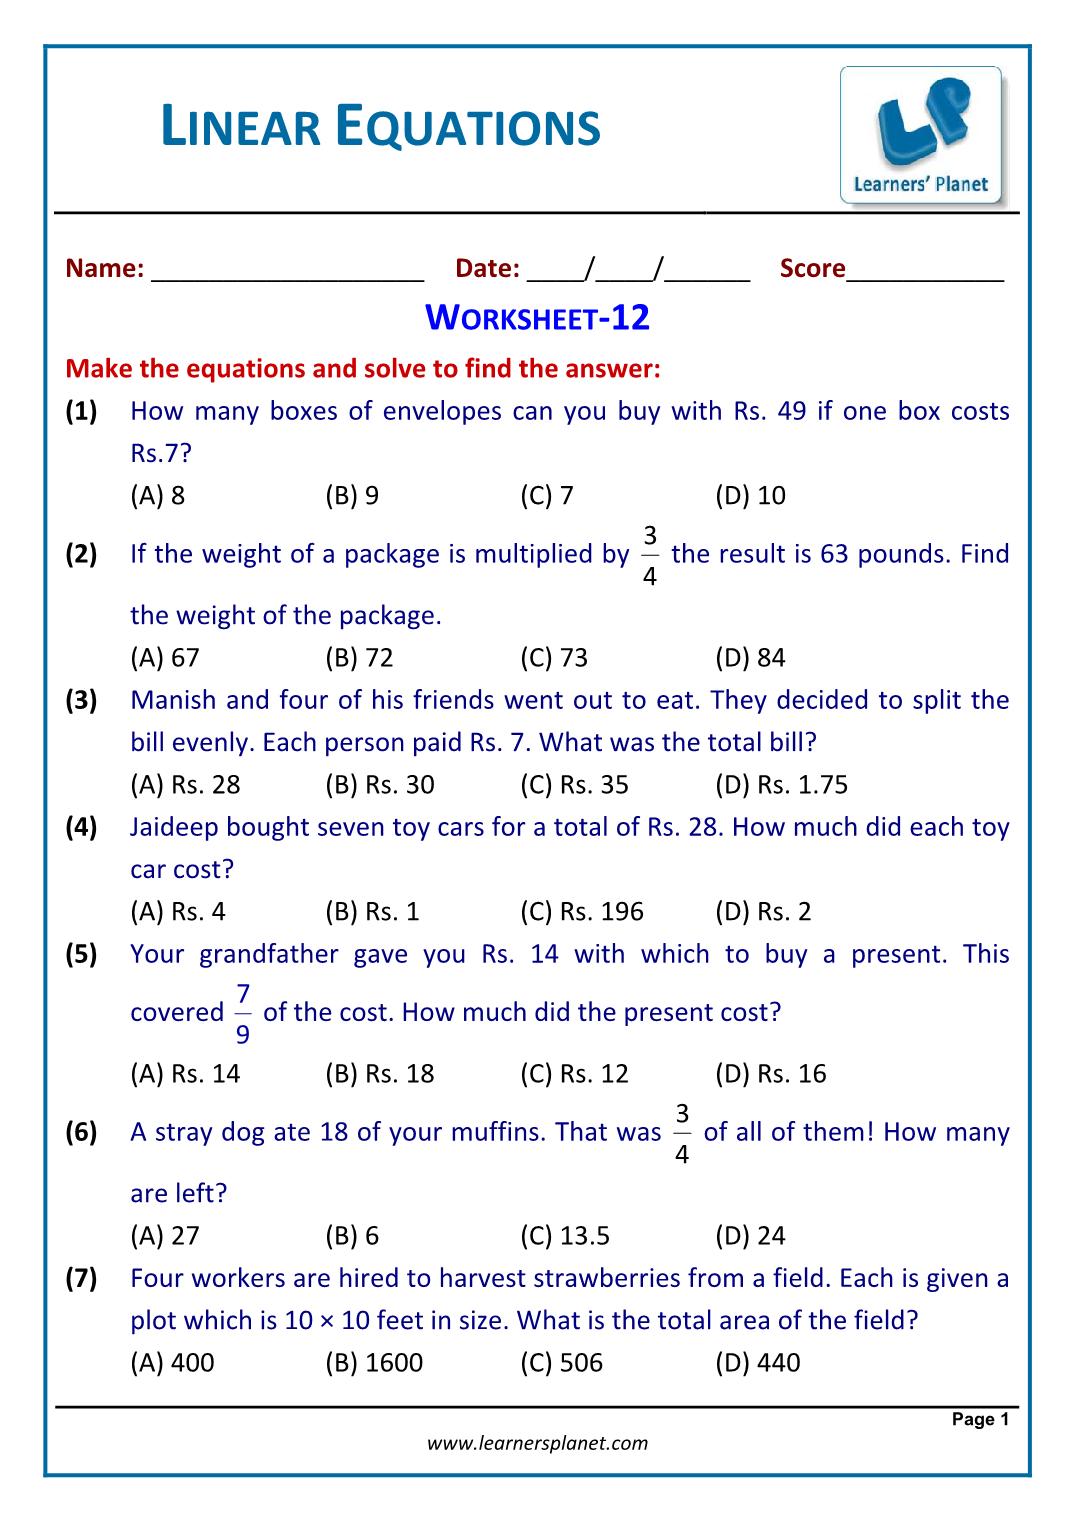 Solve linear equations word problems worksheet grade 24 For Linear Word Problem Worksheet